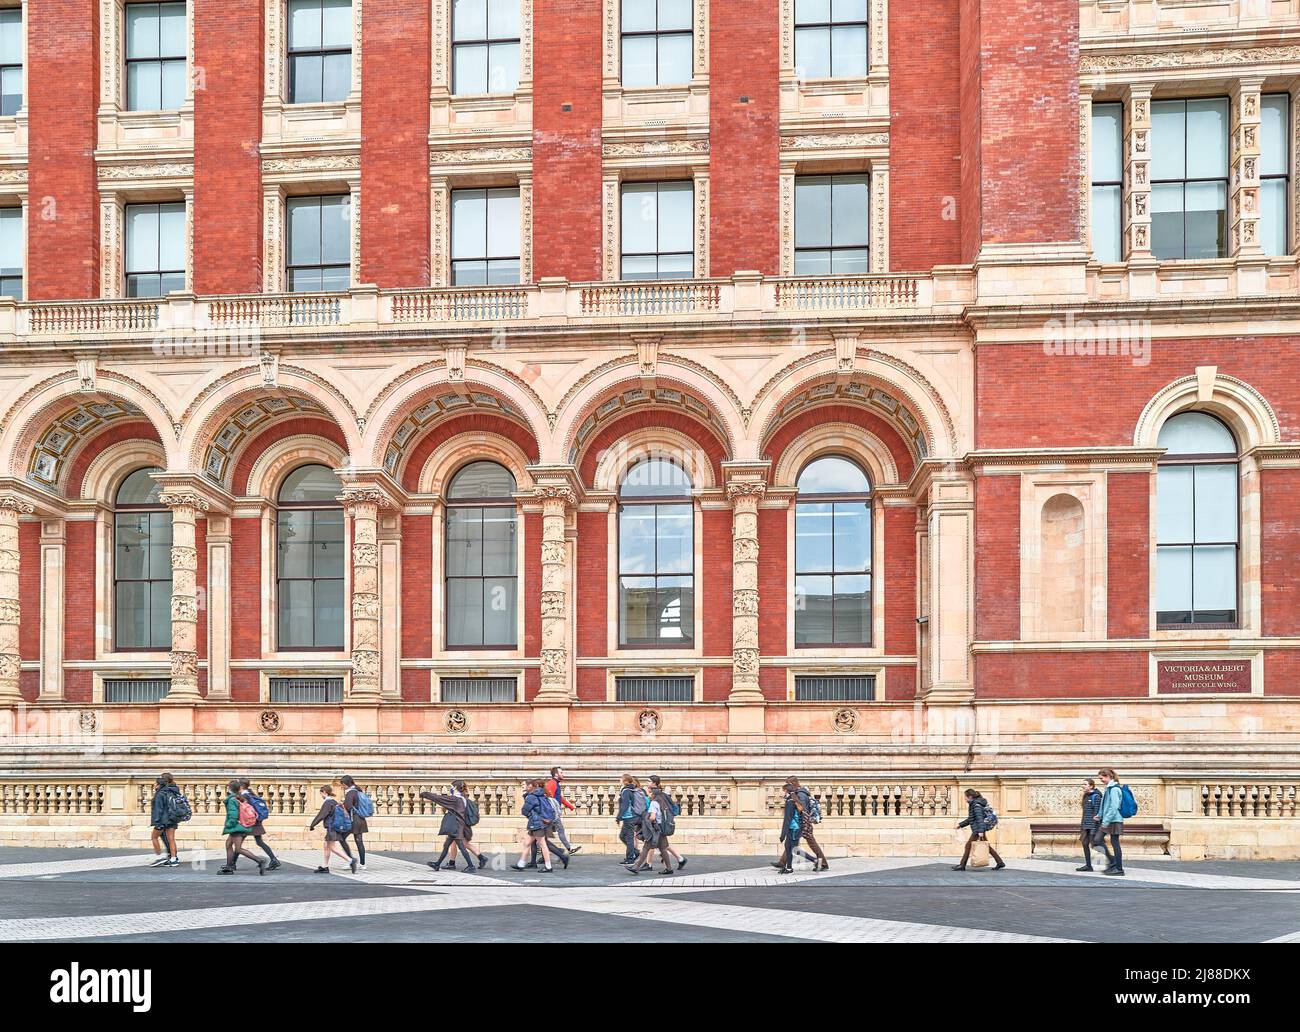 A party of schoolchildren walk pasts the Henry Cole wing of the Victoria and Albert museum, London, England. Stock Photo